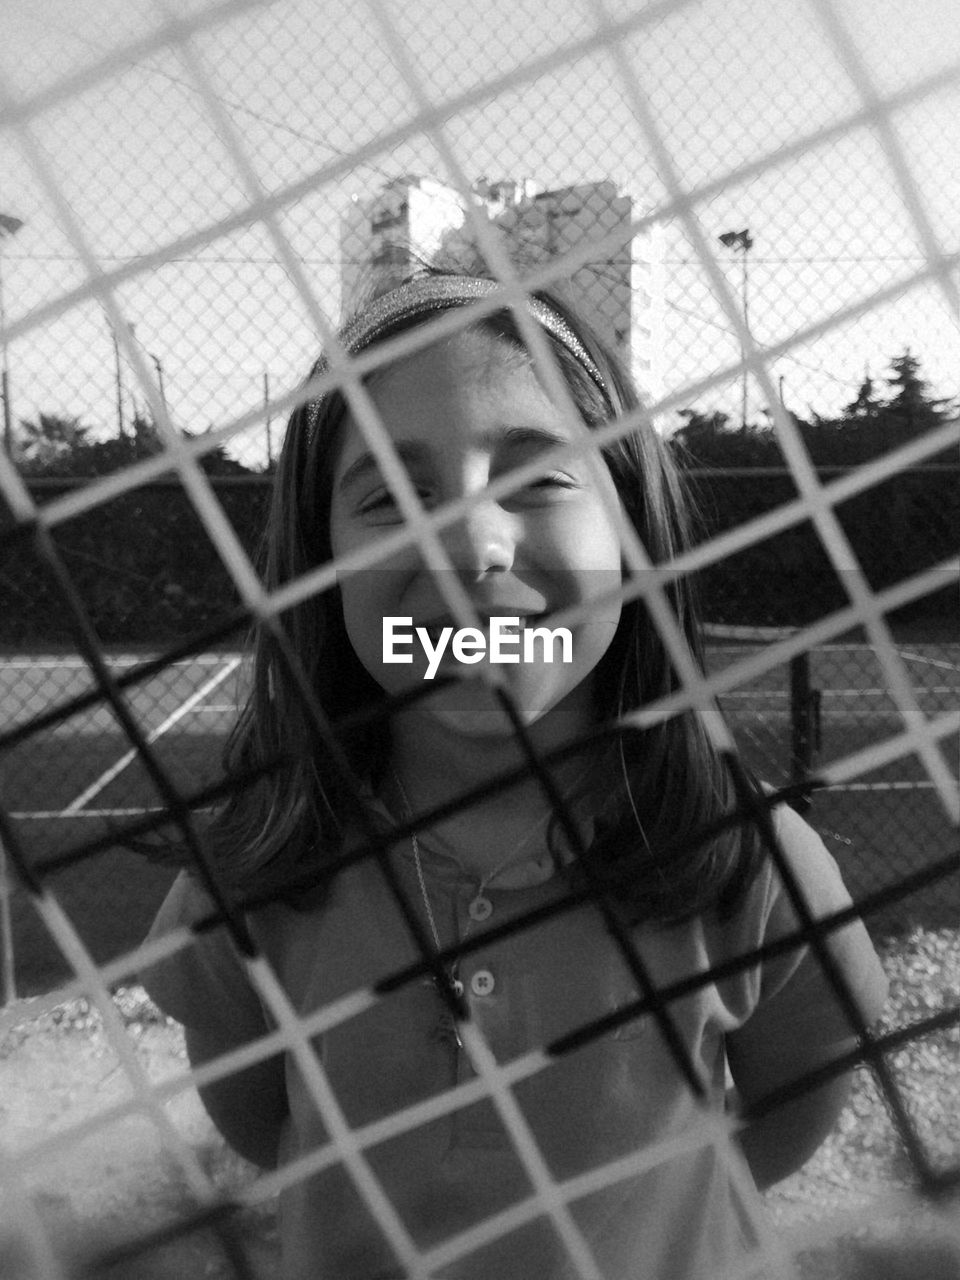 Portrait of smiling girl seen through chainlink fence